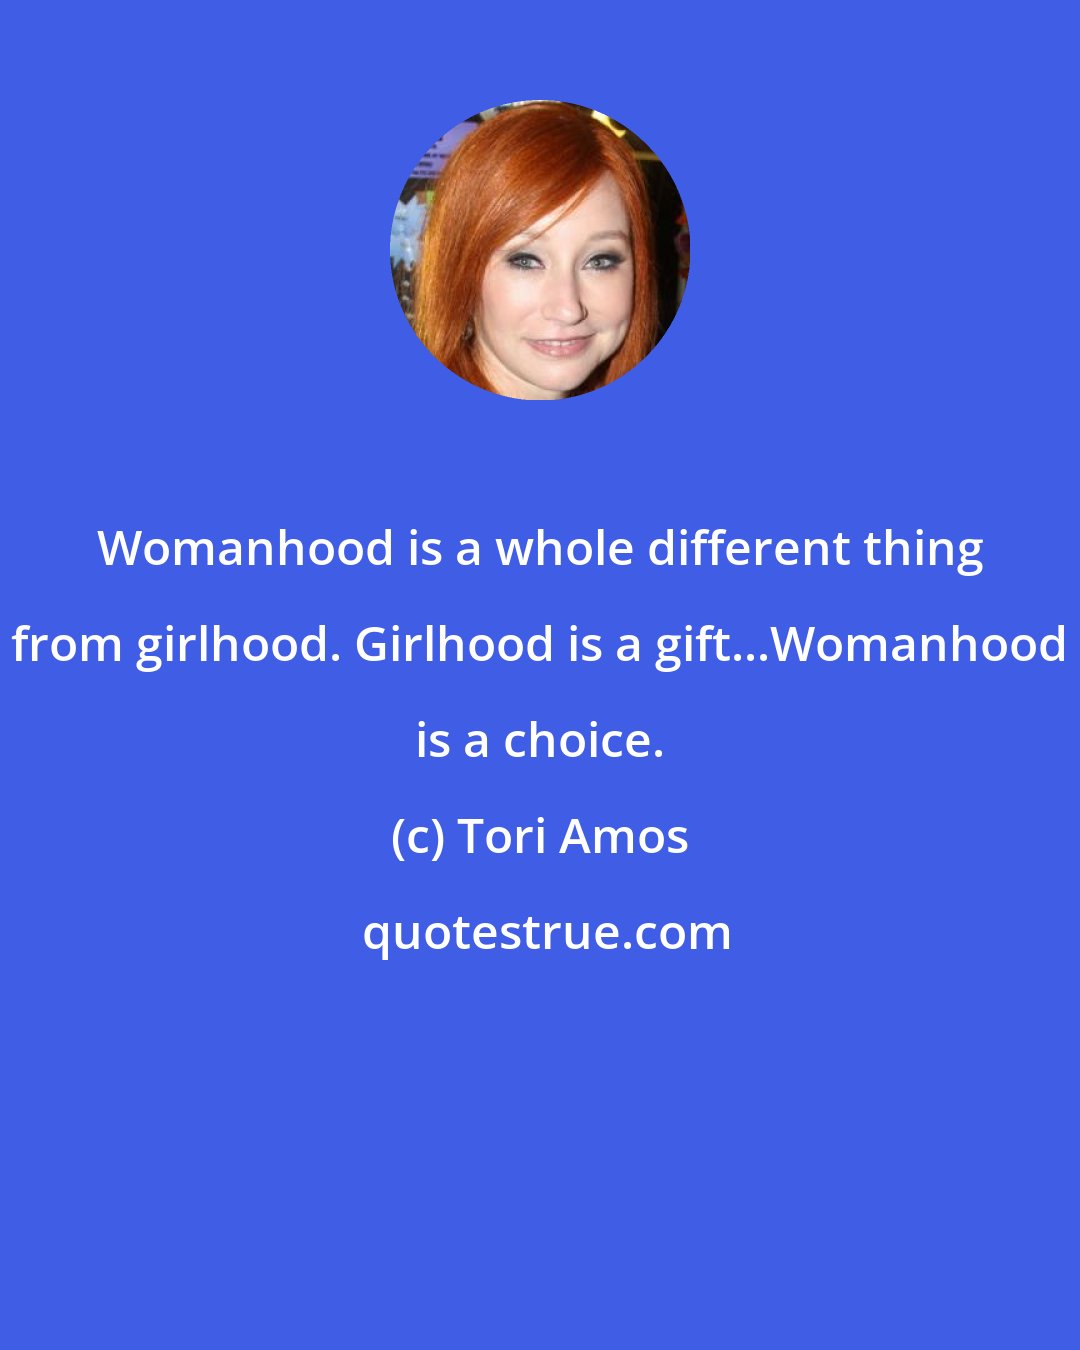 Tori Amos: Womanhood is a whole different thing from girlhood. Girlhood is a gift...Womanhood is a choice.